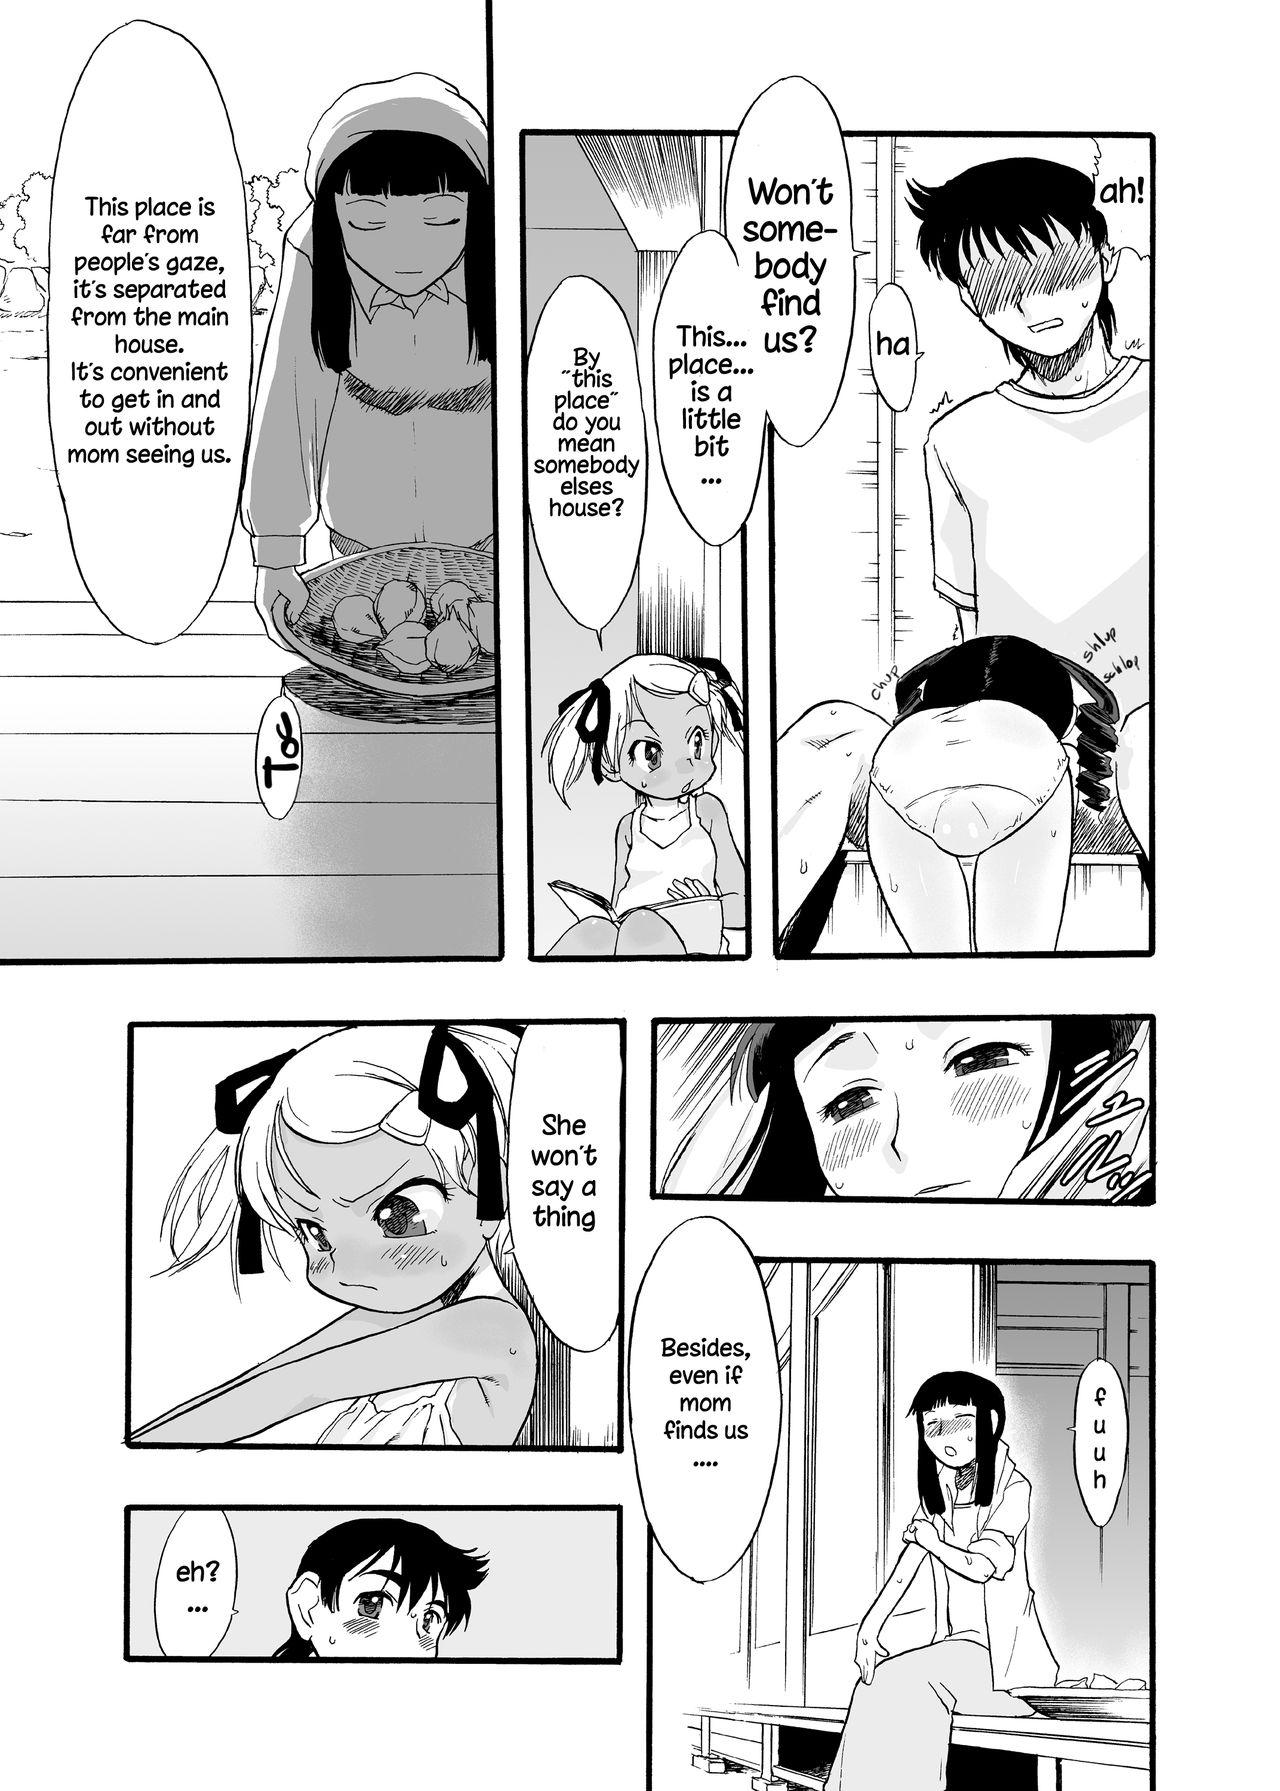 Fingers Nushi no Sumu Yama Vol. 8 | The God Who Dwell in the Mountain Chapter 8 - Original Long Hair - Page 10